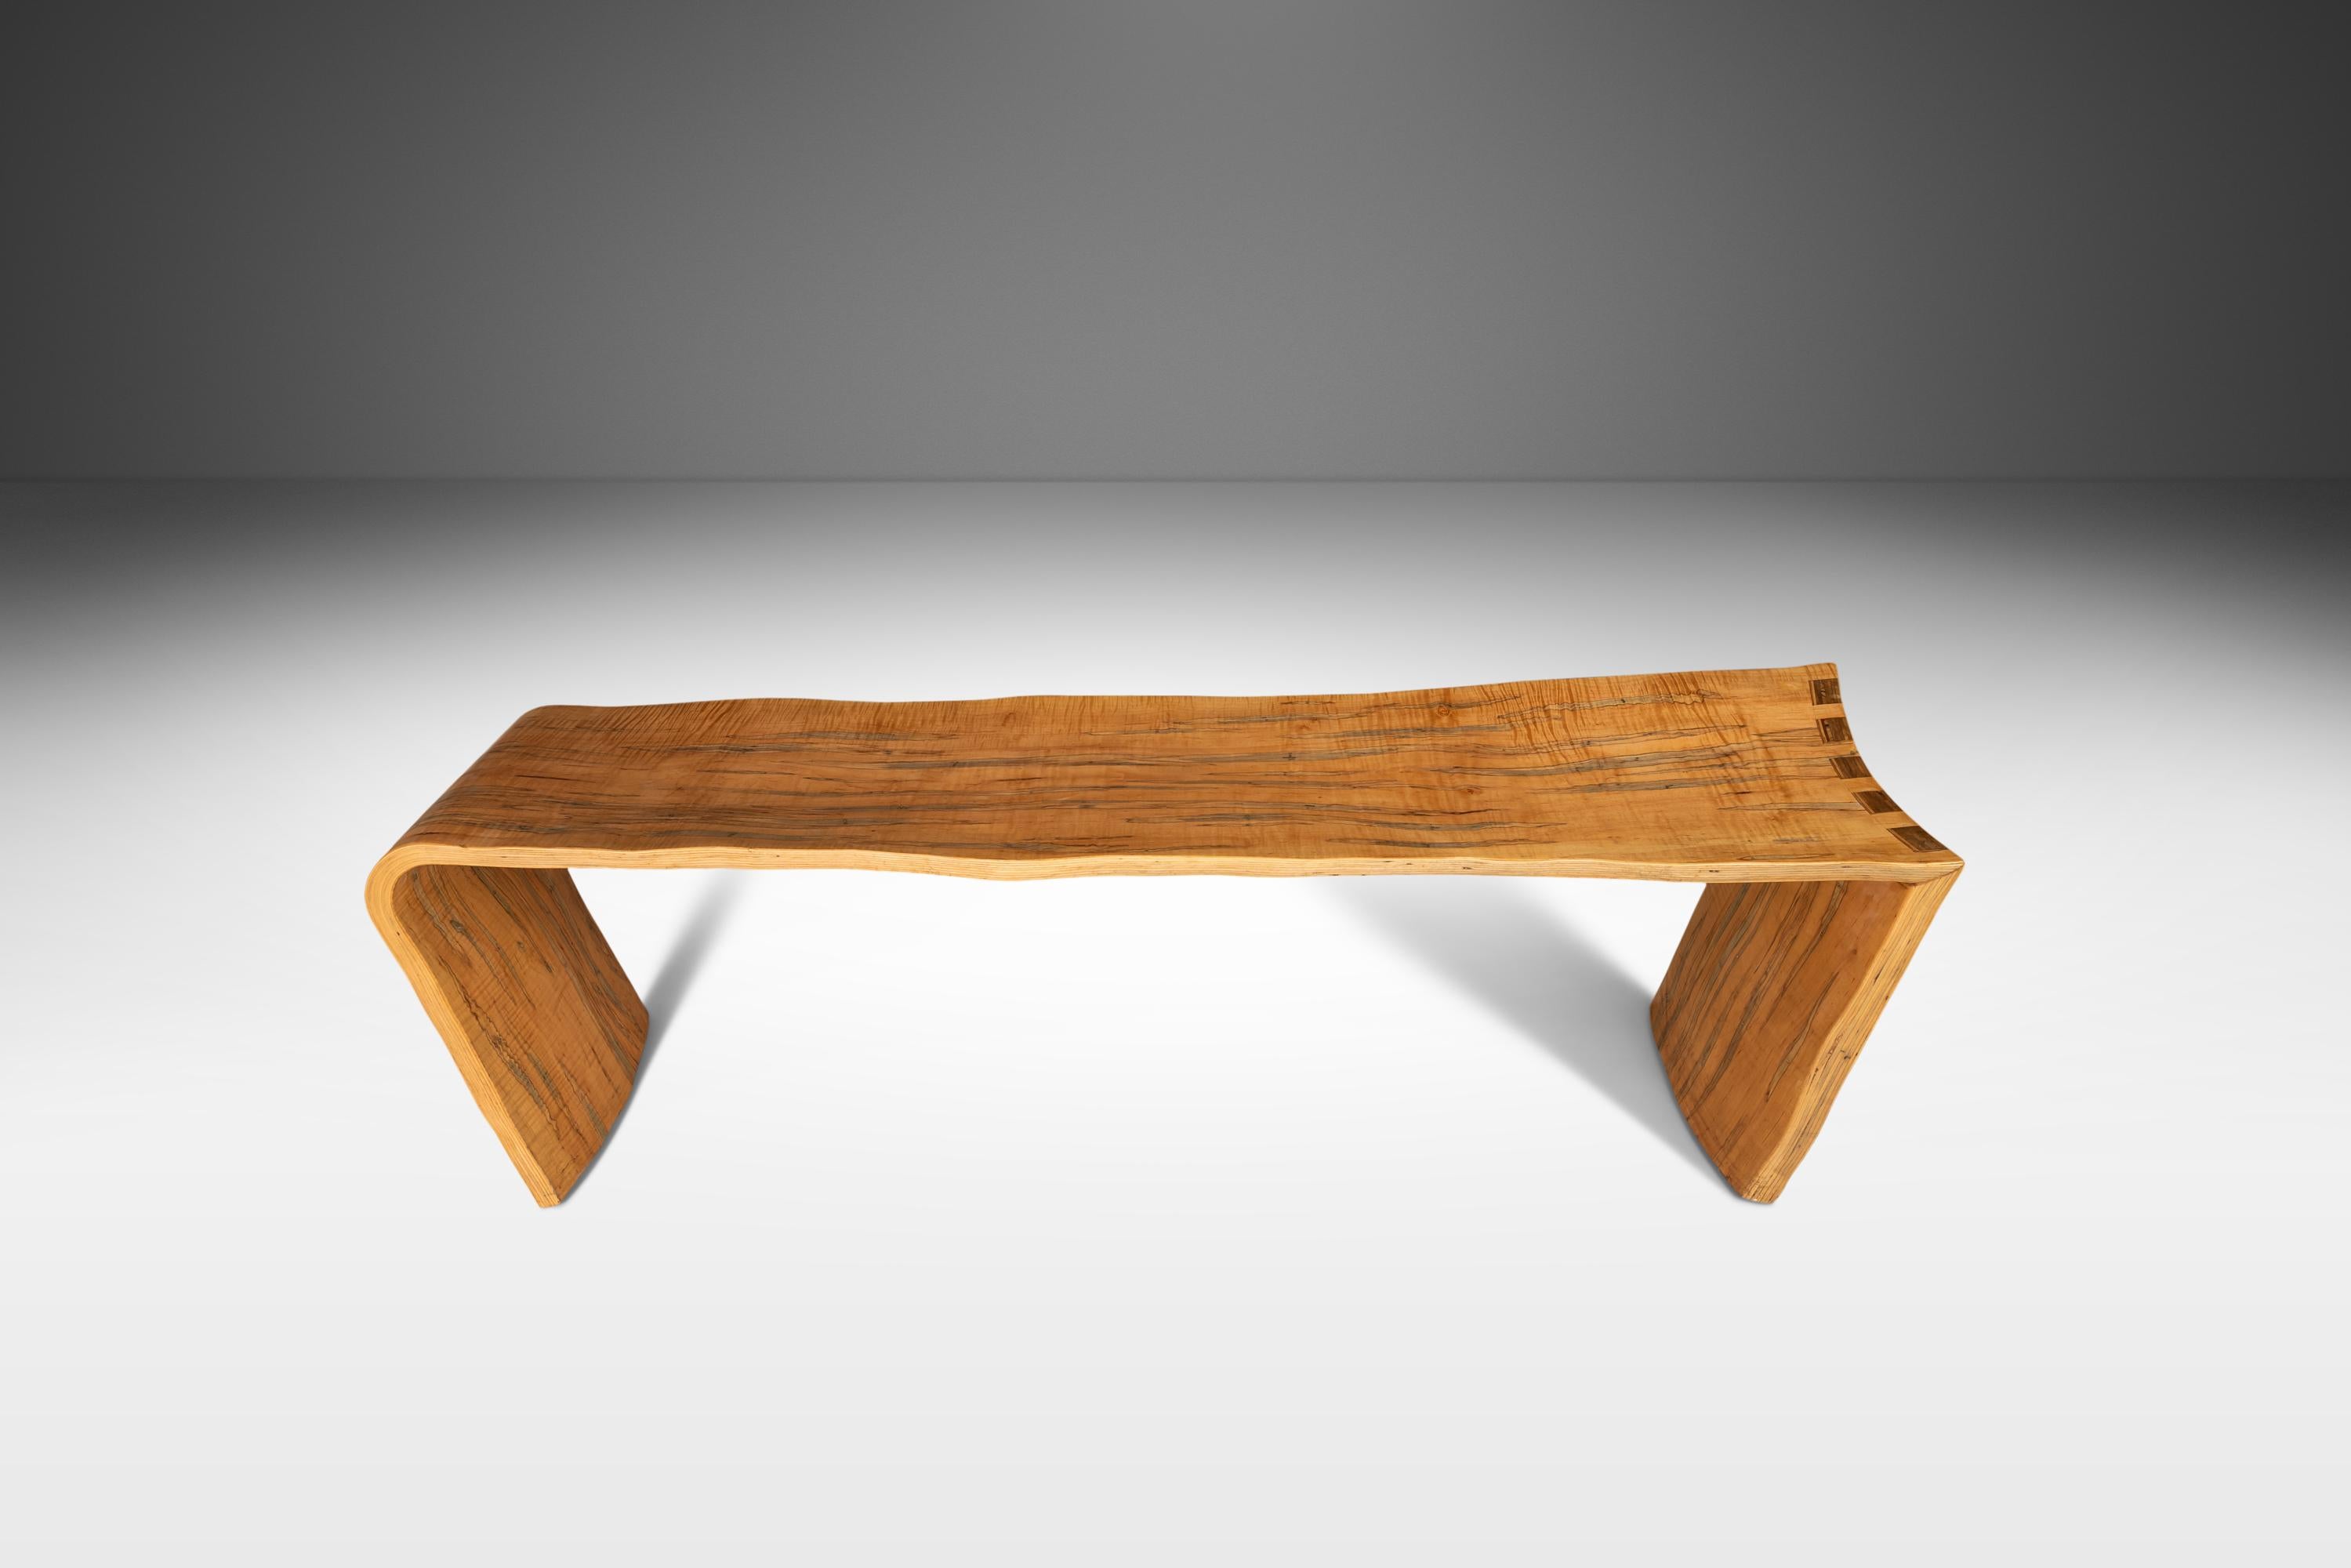 Bentwood Asymmetrical Abstract Three Seater Bench in Ambrosia Maple, Usa, 1980s For Sale 8